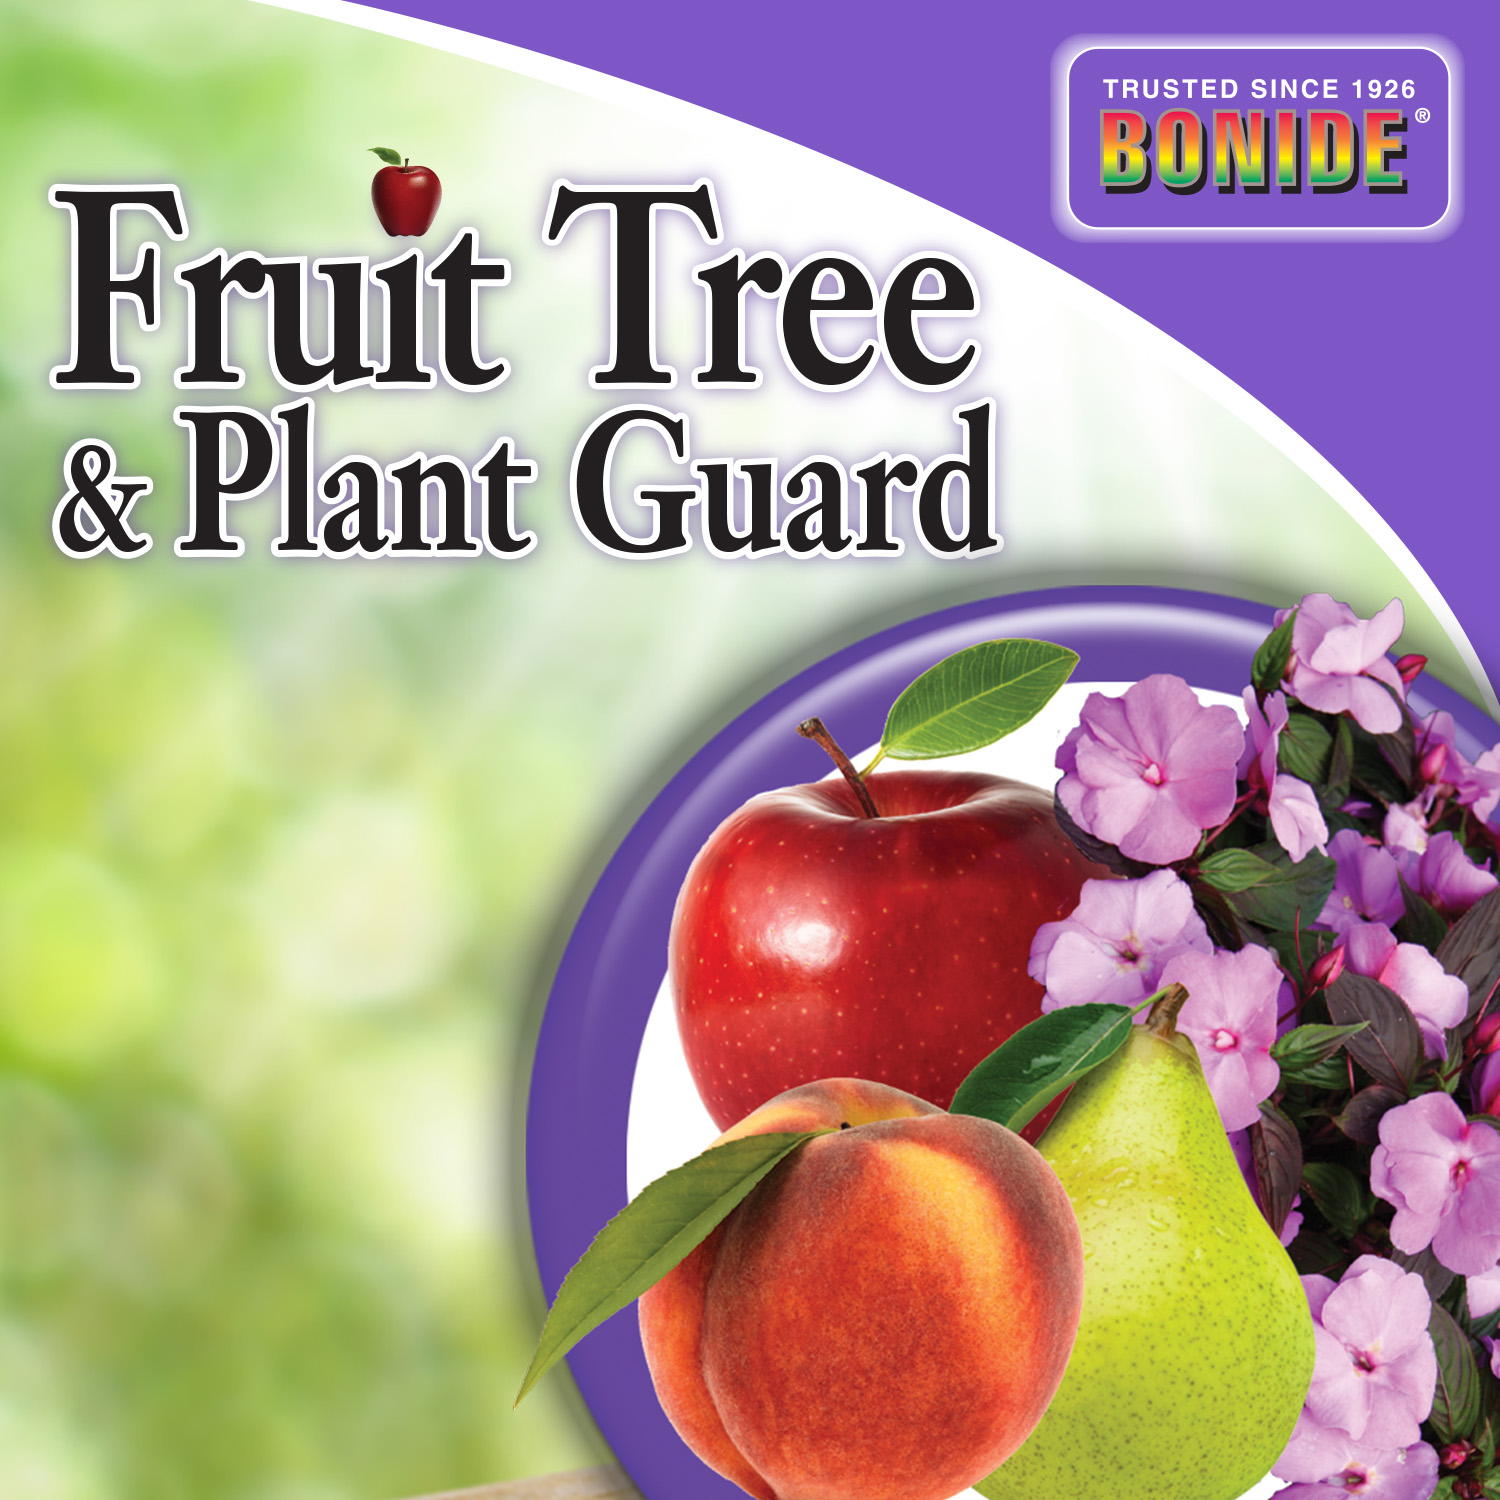 Bonide - Fruit Tree and Plant Guard Concentrate